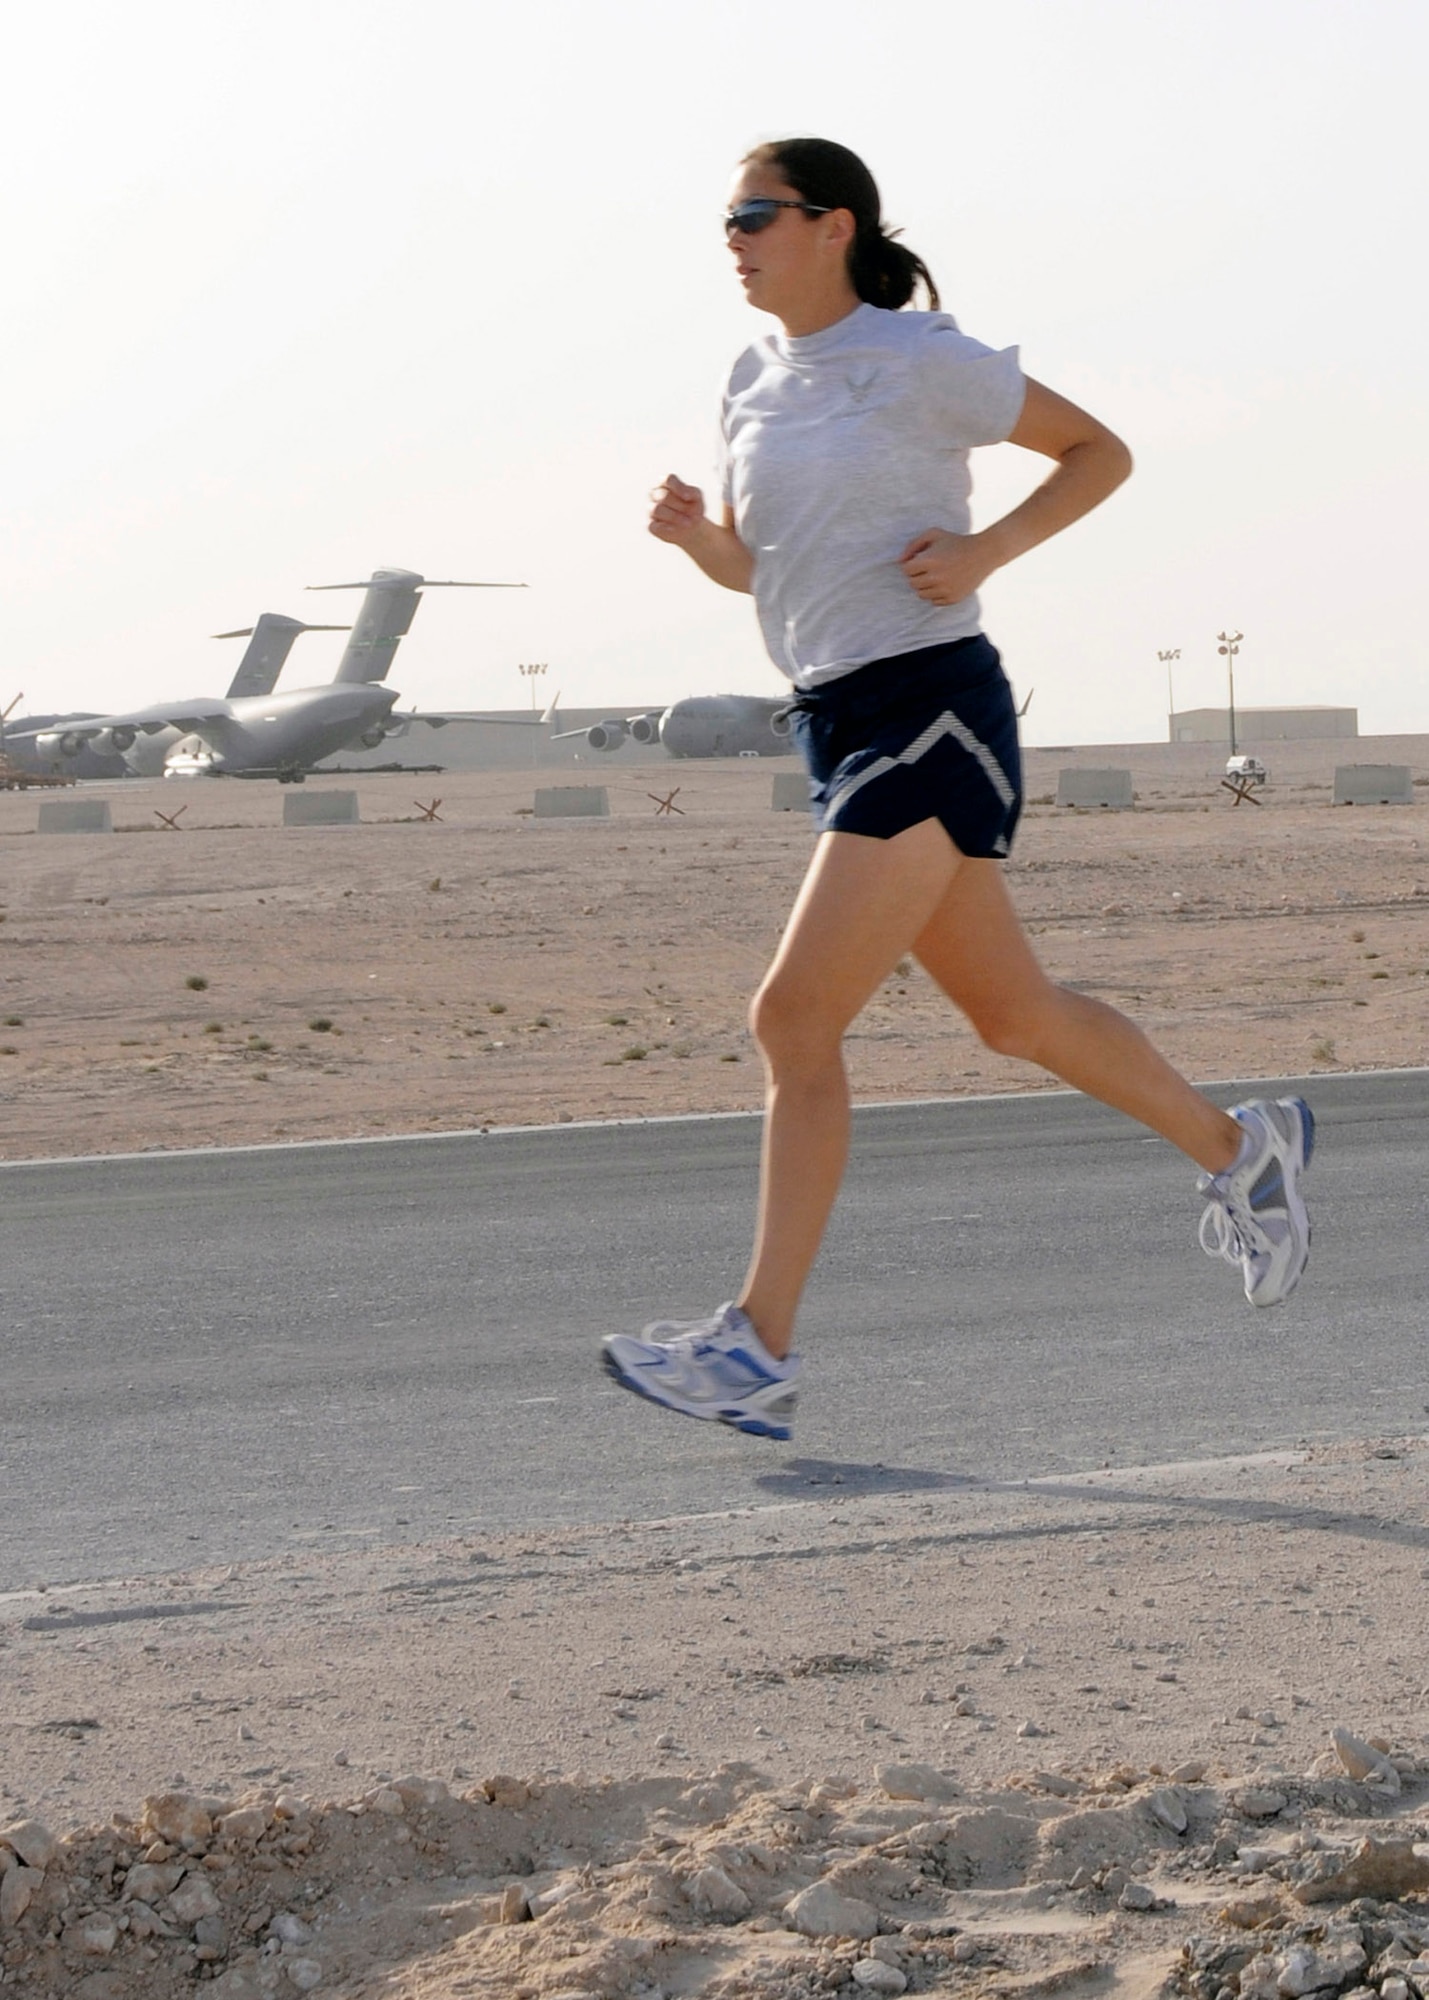 1st Lt. Jessica Jessica Lopez trains for the L.A. Marathon from her deployed location Feb. 13 in Southwest Asia. After she received deployment orders and realized she would miss running the marathon stateside with her mother, Dawn, on March 2, the duo decided to run the marathon at the same time, 11 time zones apart. Lieutenant Lopez finished in 3:39. (U.S. Air Force photo/Senior Airman Domonique Simmons) 